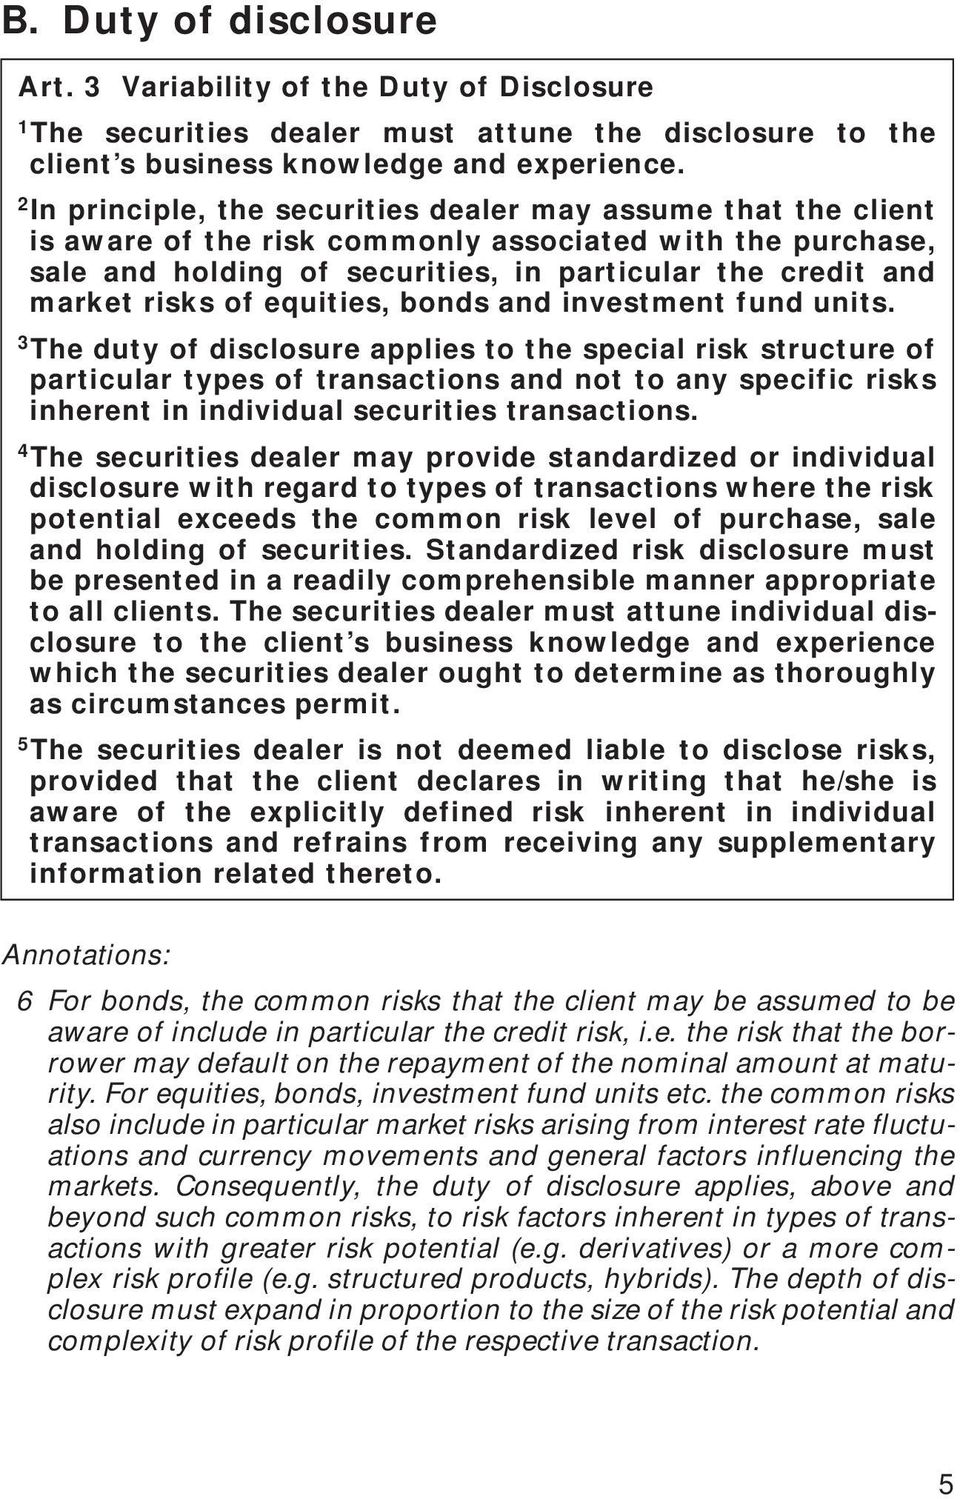 equities, bonds and investment fund units.